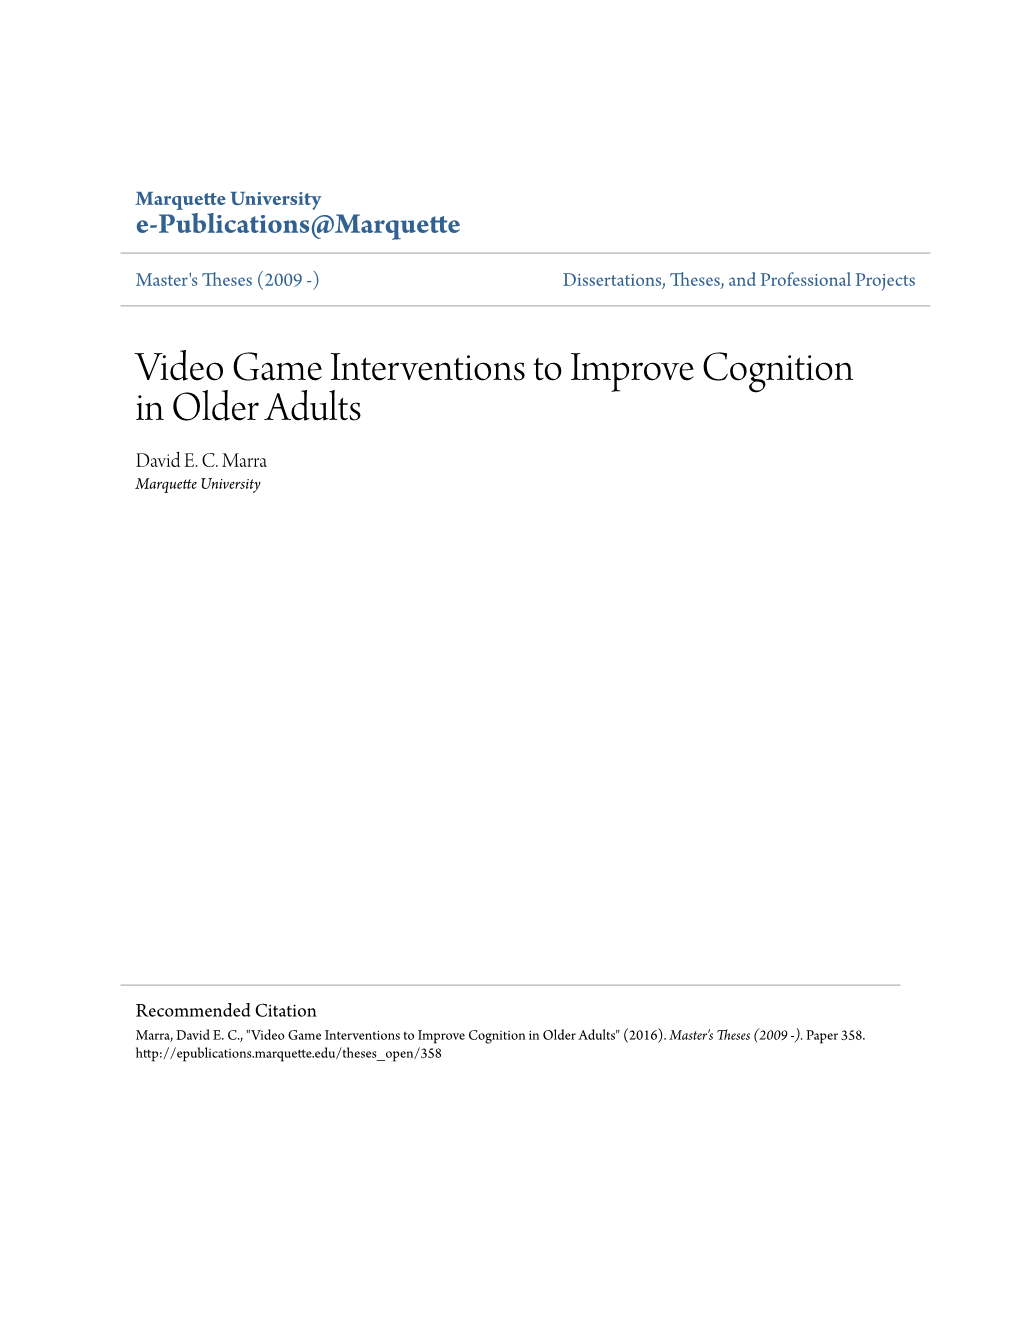 Video Game Interventions to Improve Cognition in Older Adults David E